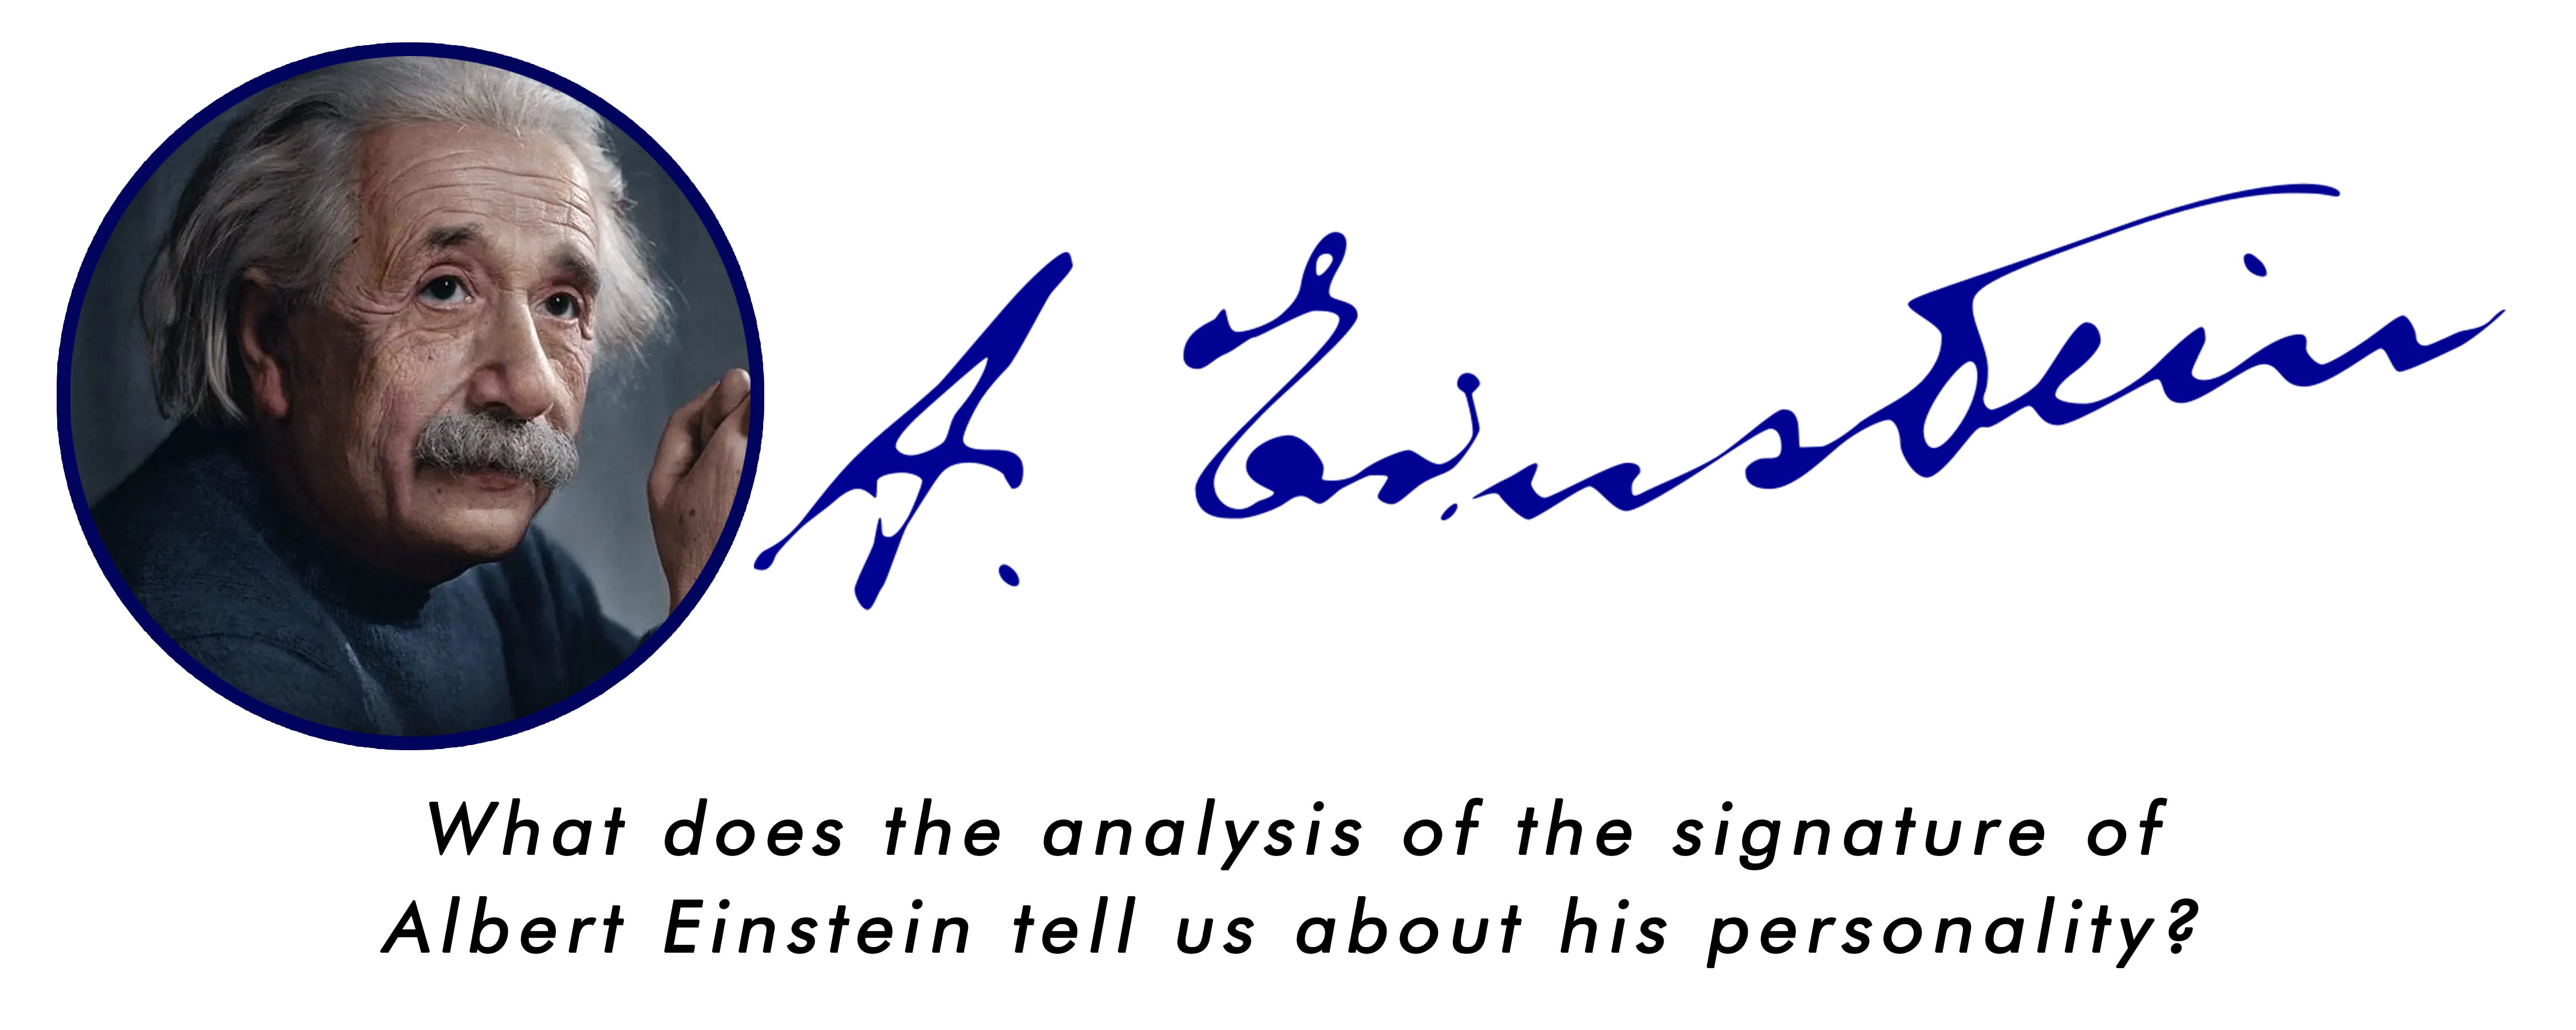 What does the analysis of the signature of Albert Einstein tell us about his personality?